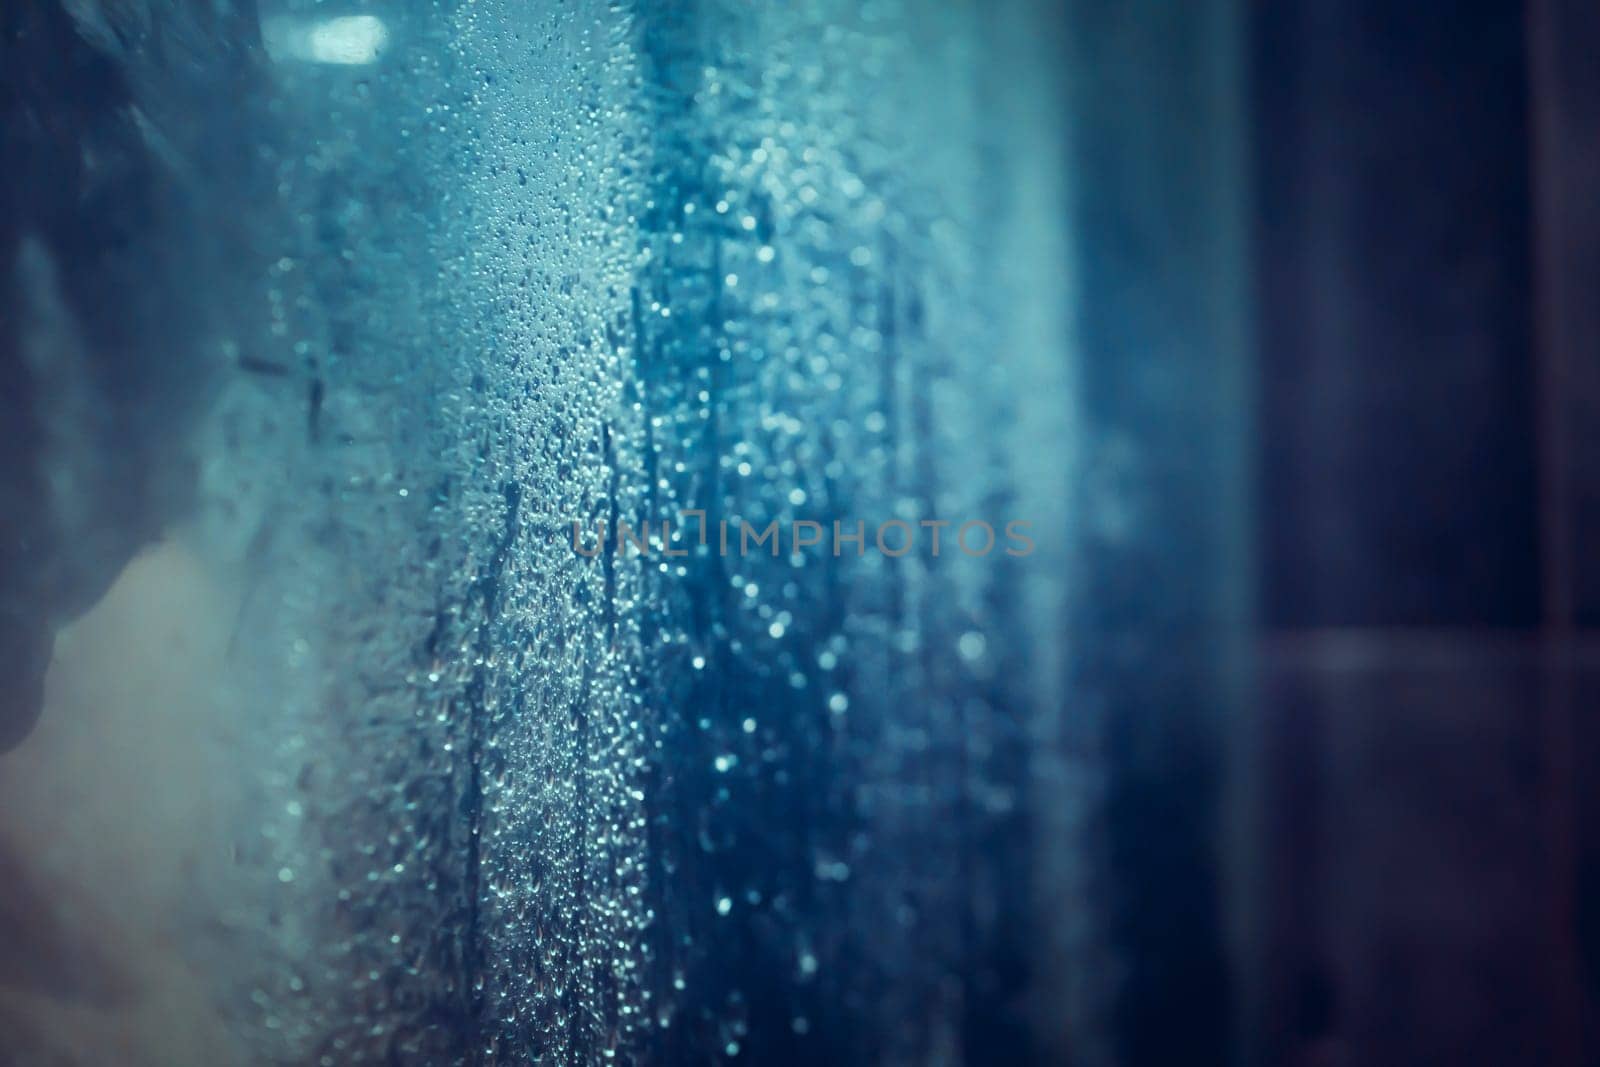 Large and small drops of water on the glass of a modern shower stall, a person takes a shower, a close-up view of the splashing water, a banner with copy space.